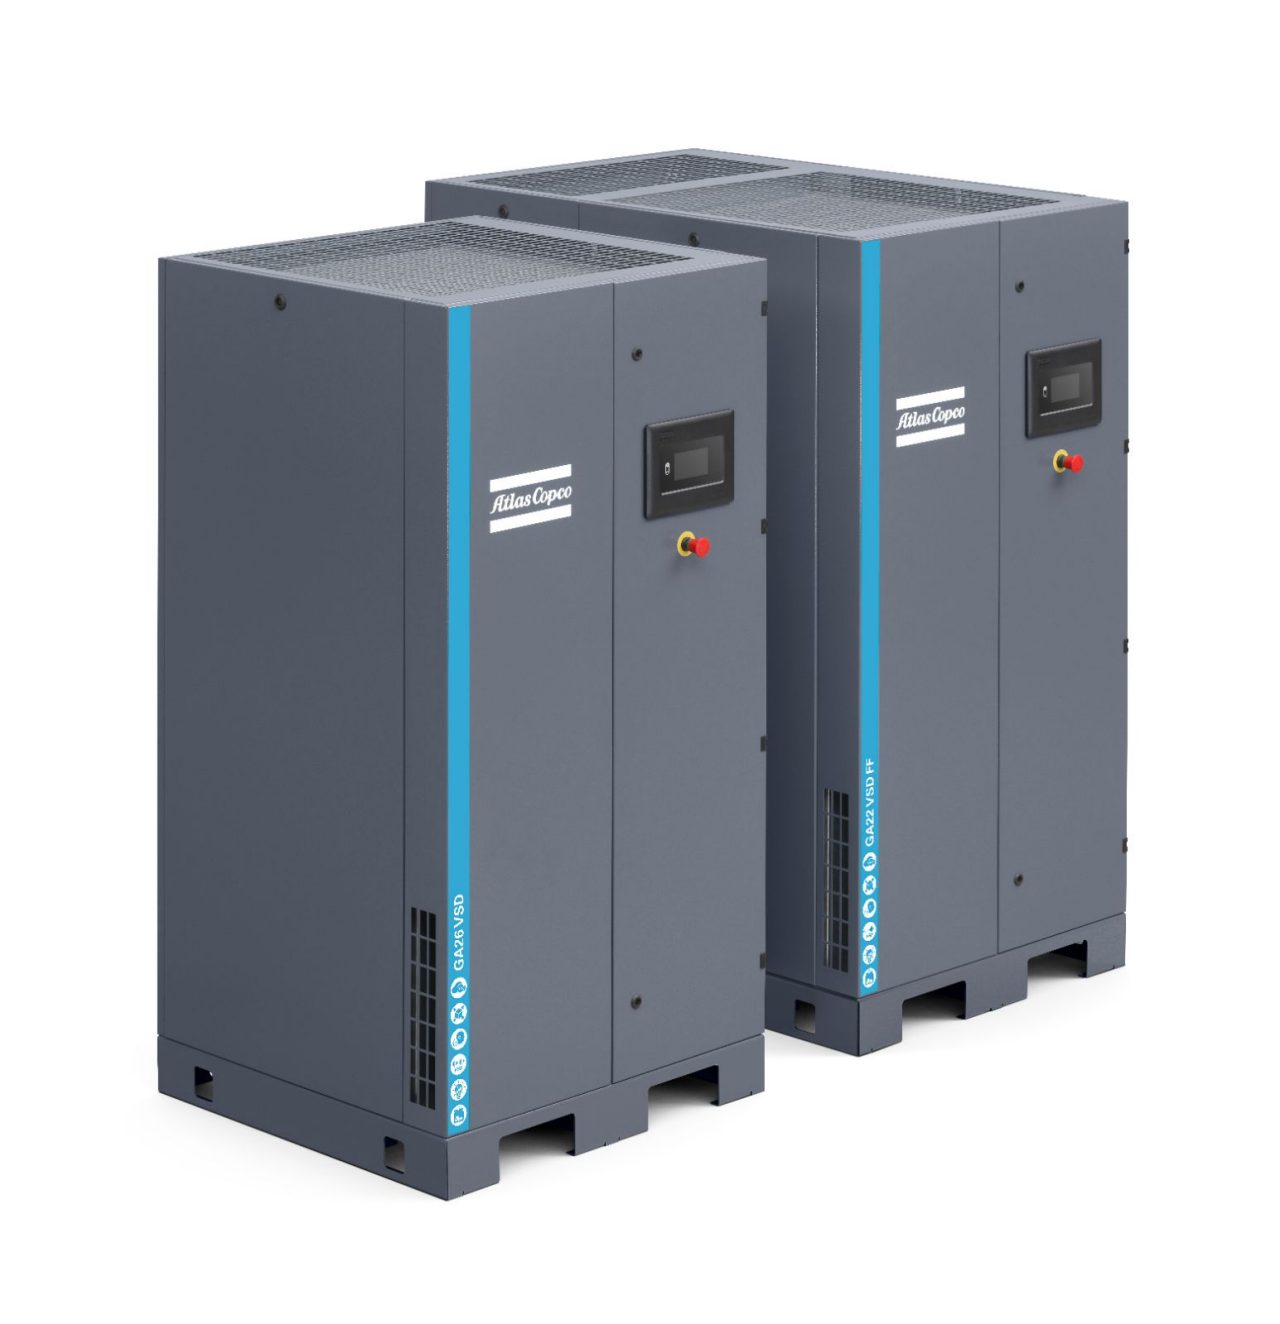 GA 22-37 VSD Oil-injected screw compressors with Variable Speed Drive technology